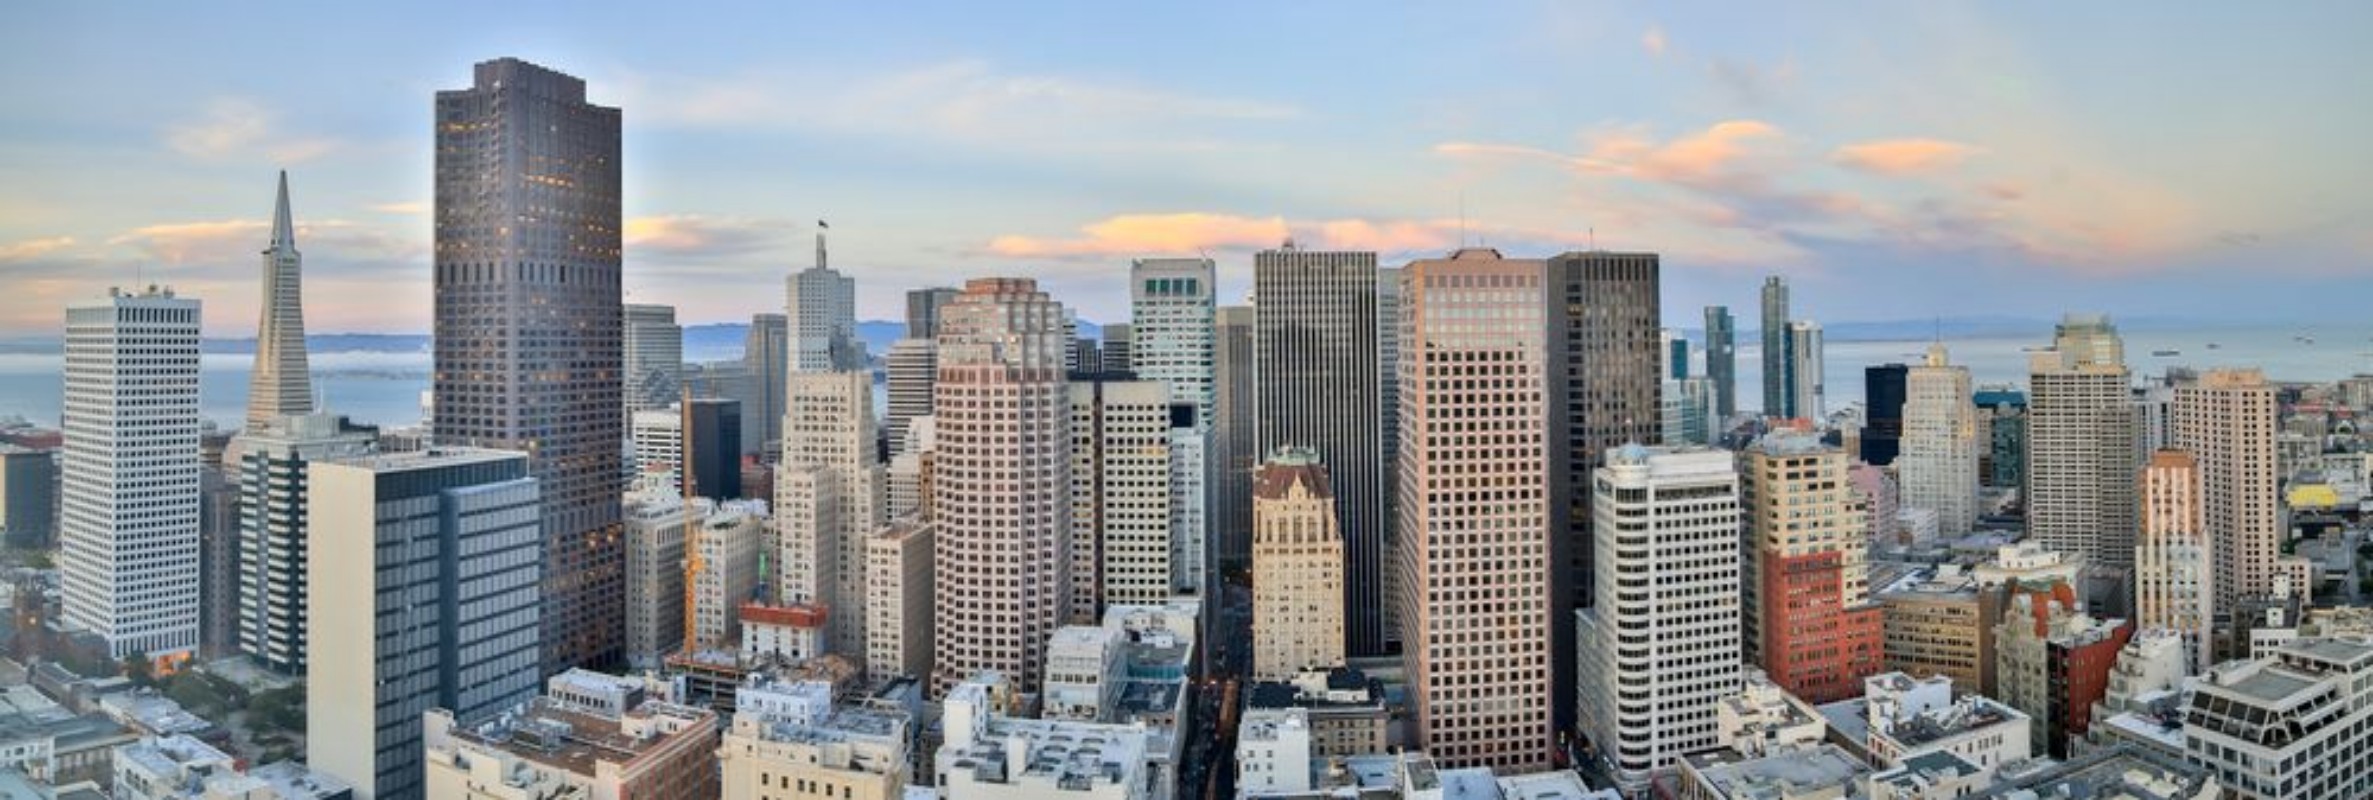 Image de San Francisco Downtown Panoramic View at Sunset Aerial view of San Francisco Financial District